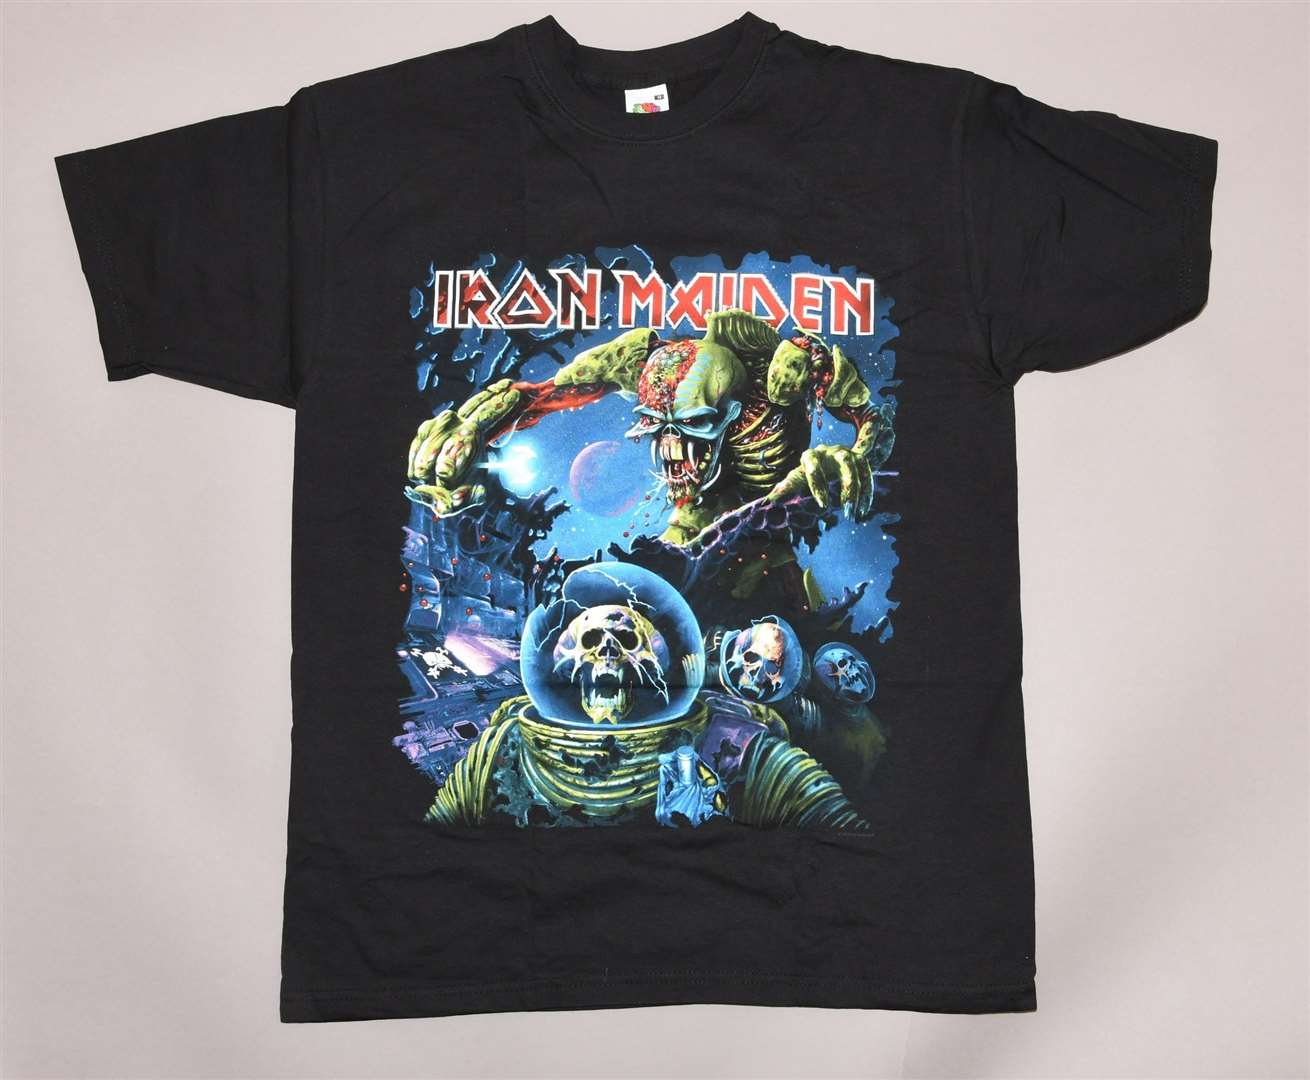 A distinctive Iron Maiden T-shirt could be a link in an unsolved murder case